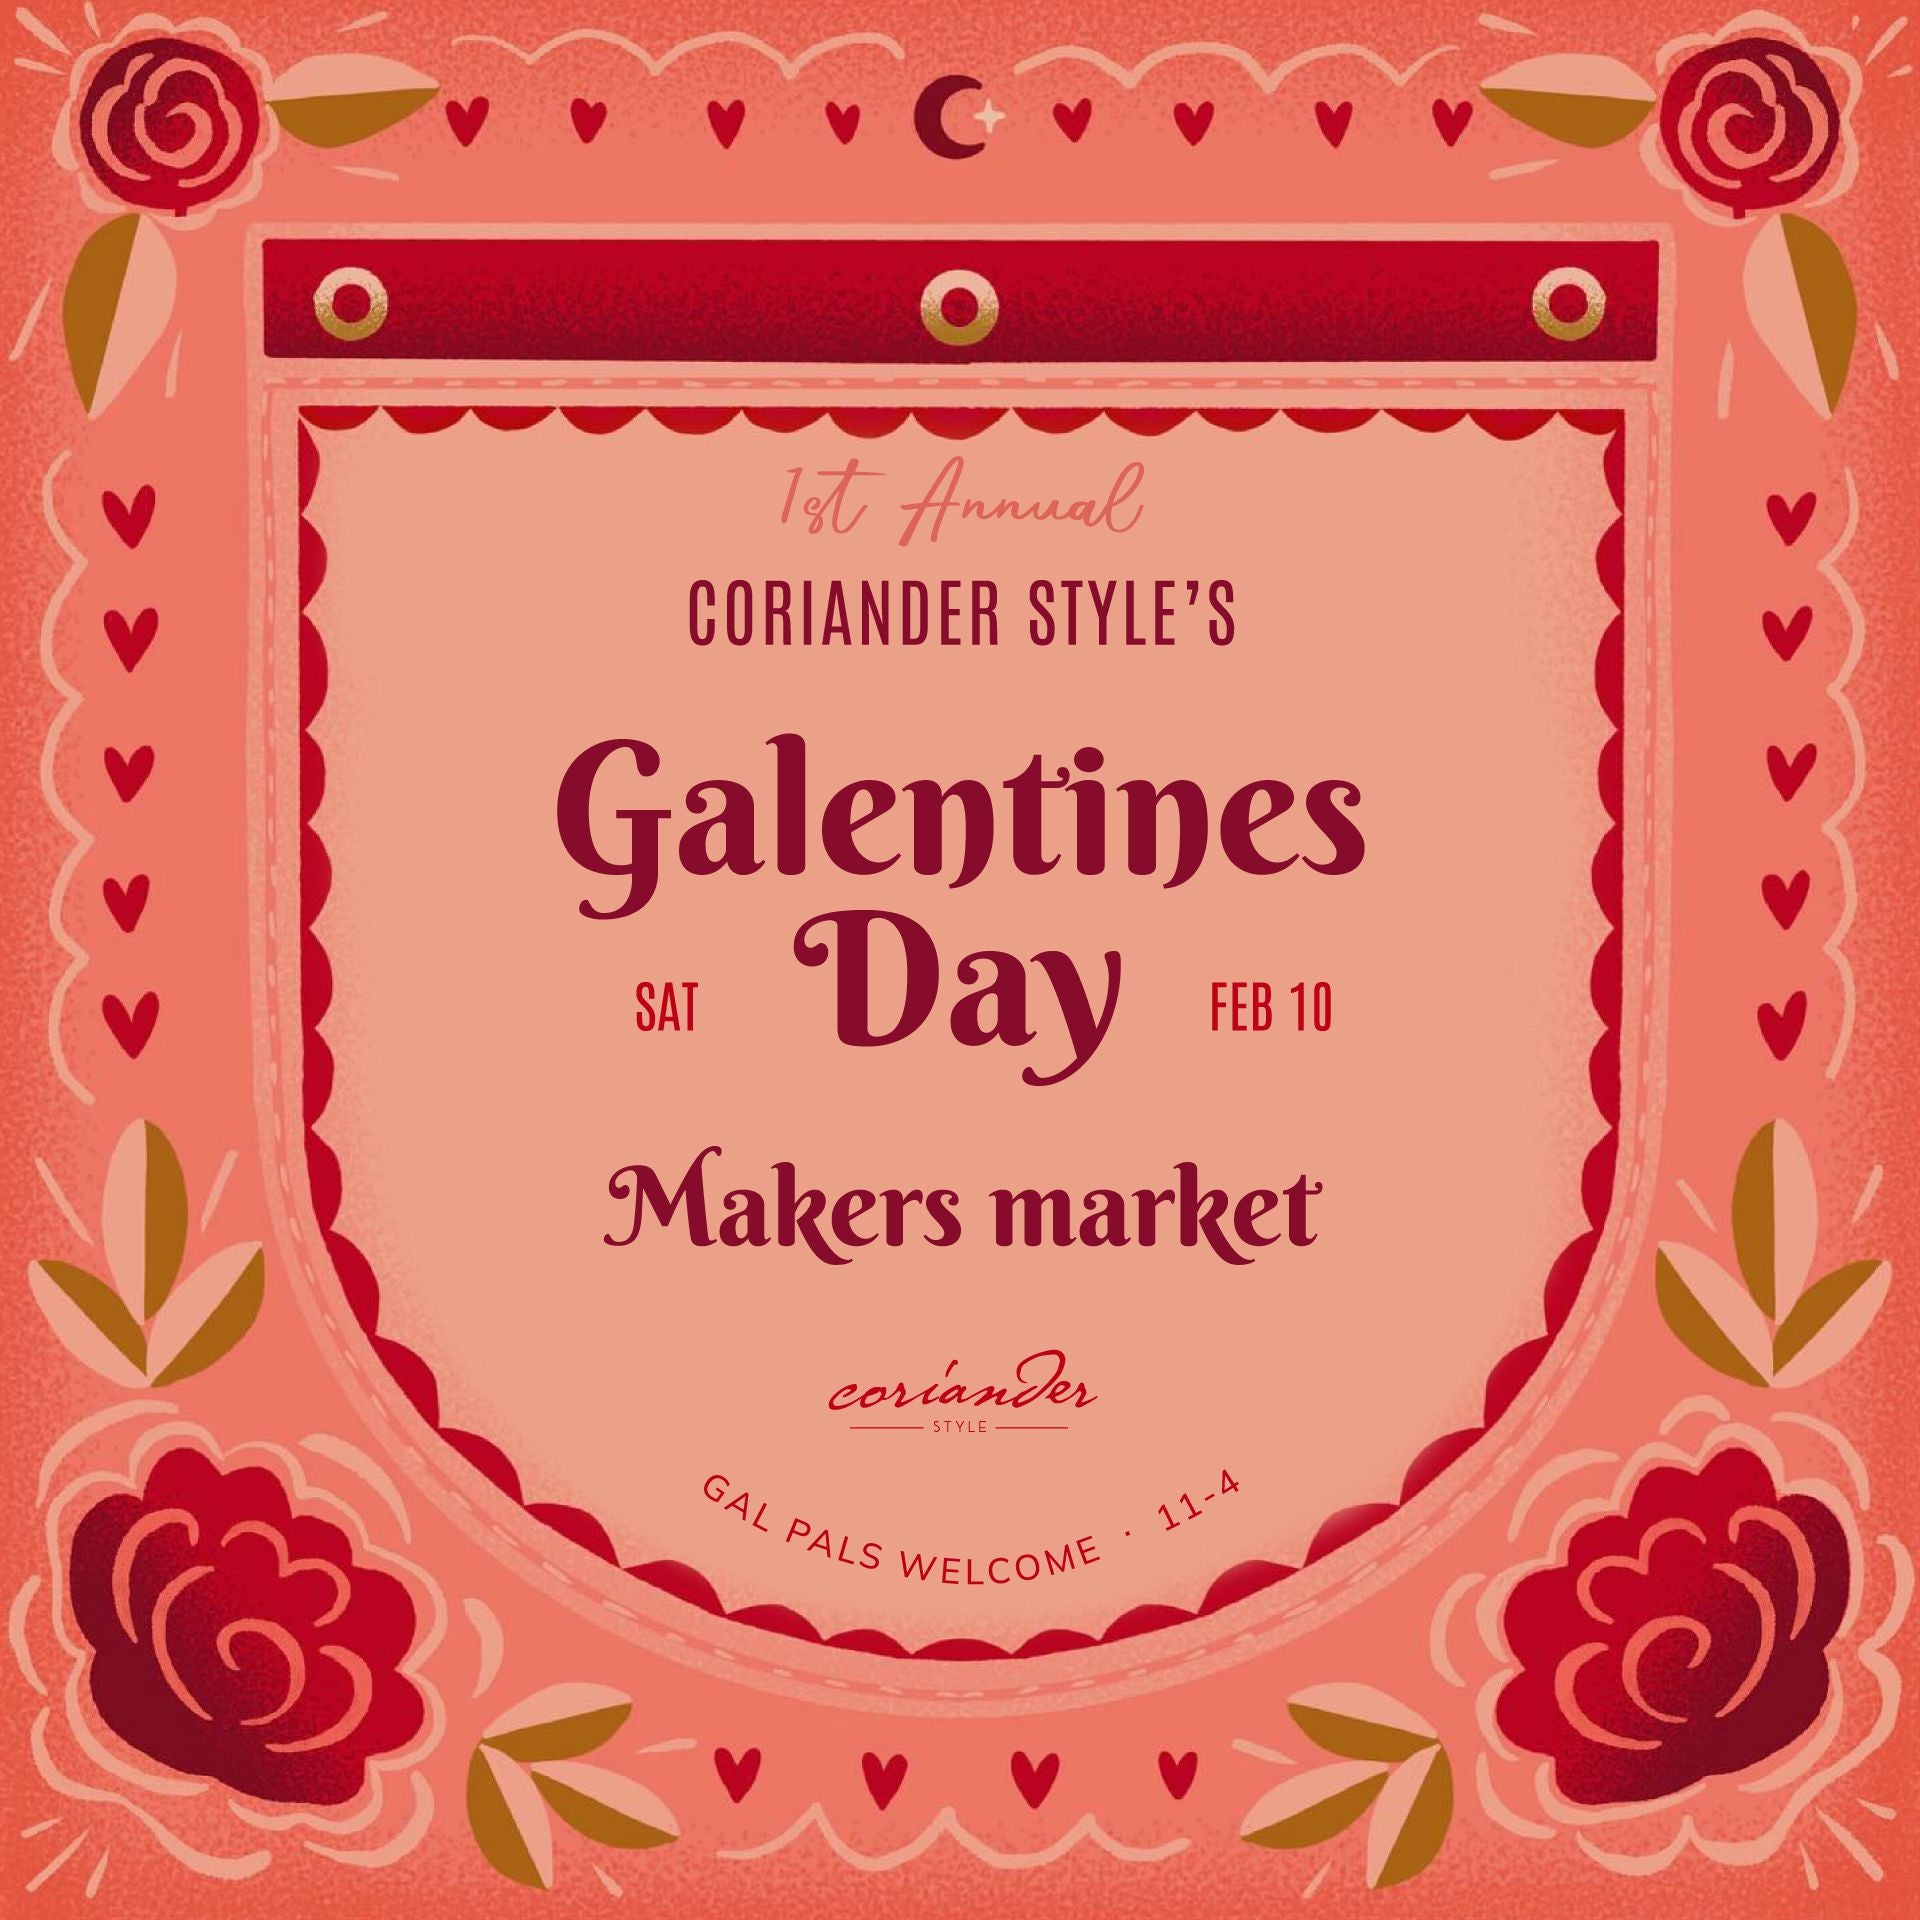 Galentine's Day Makers Market